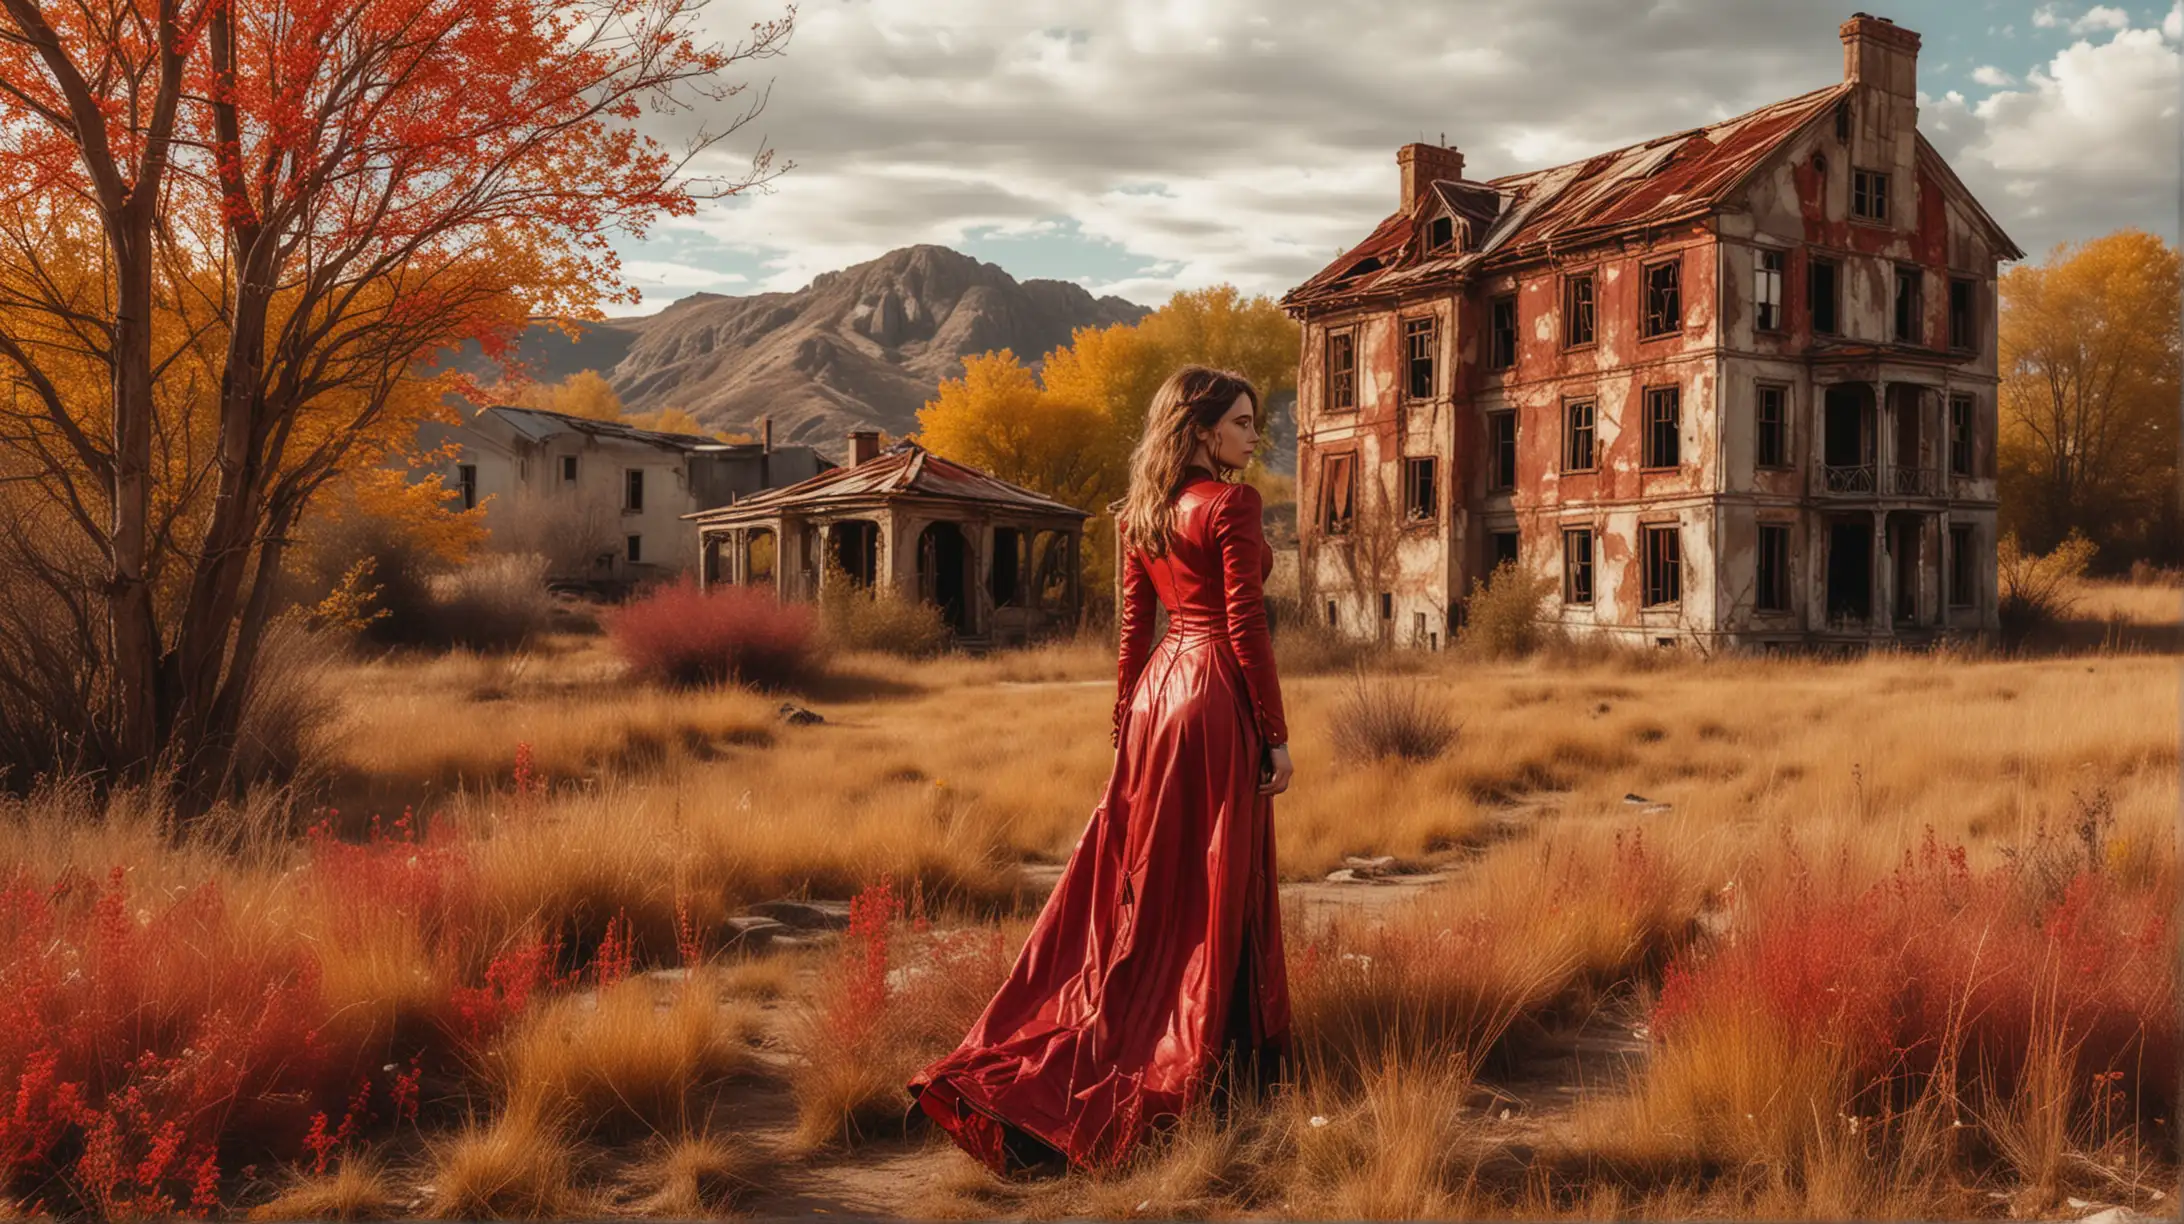 Steampunk Woman in Red and Gold Dress near Abandoned House on Promontory